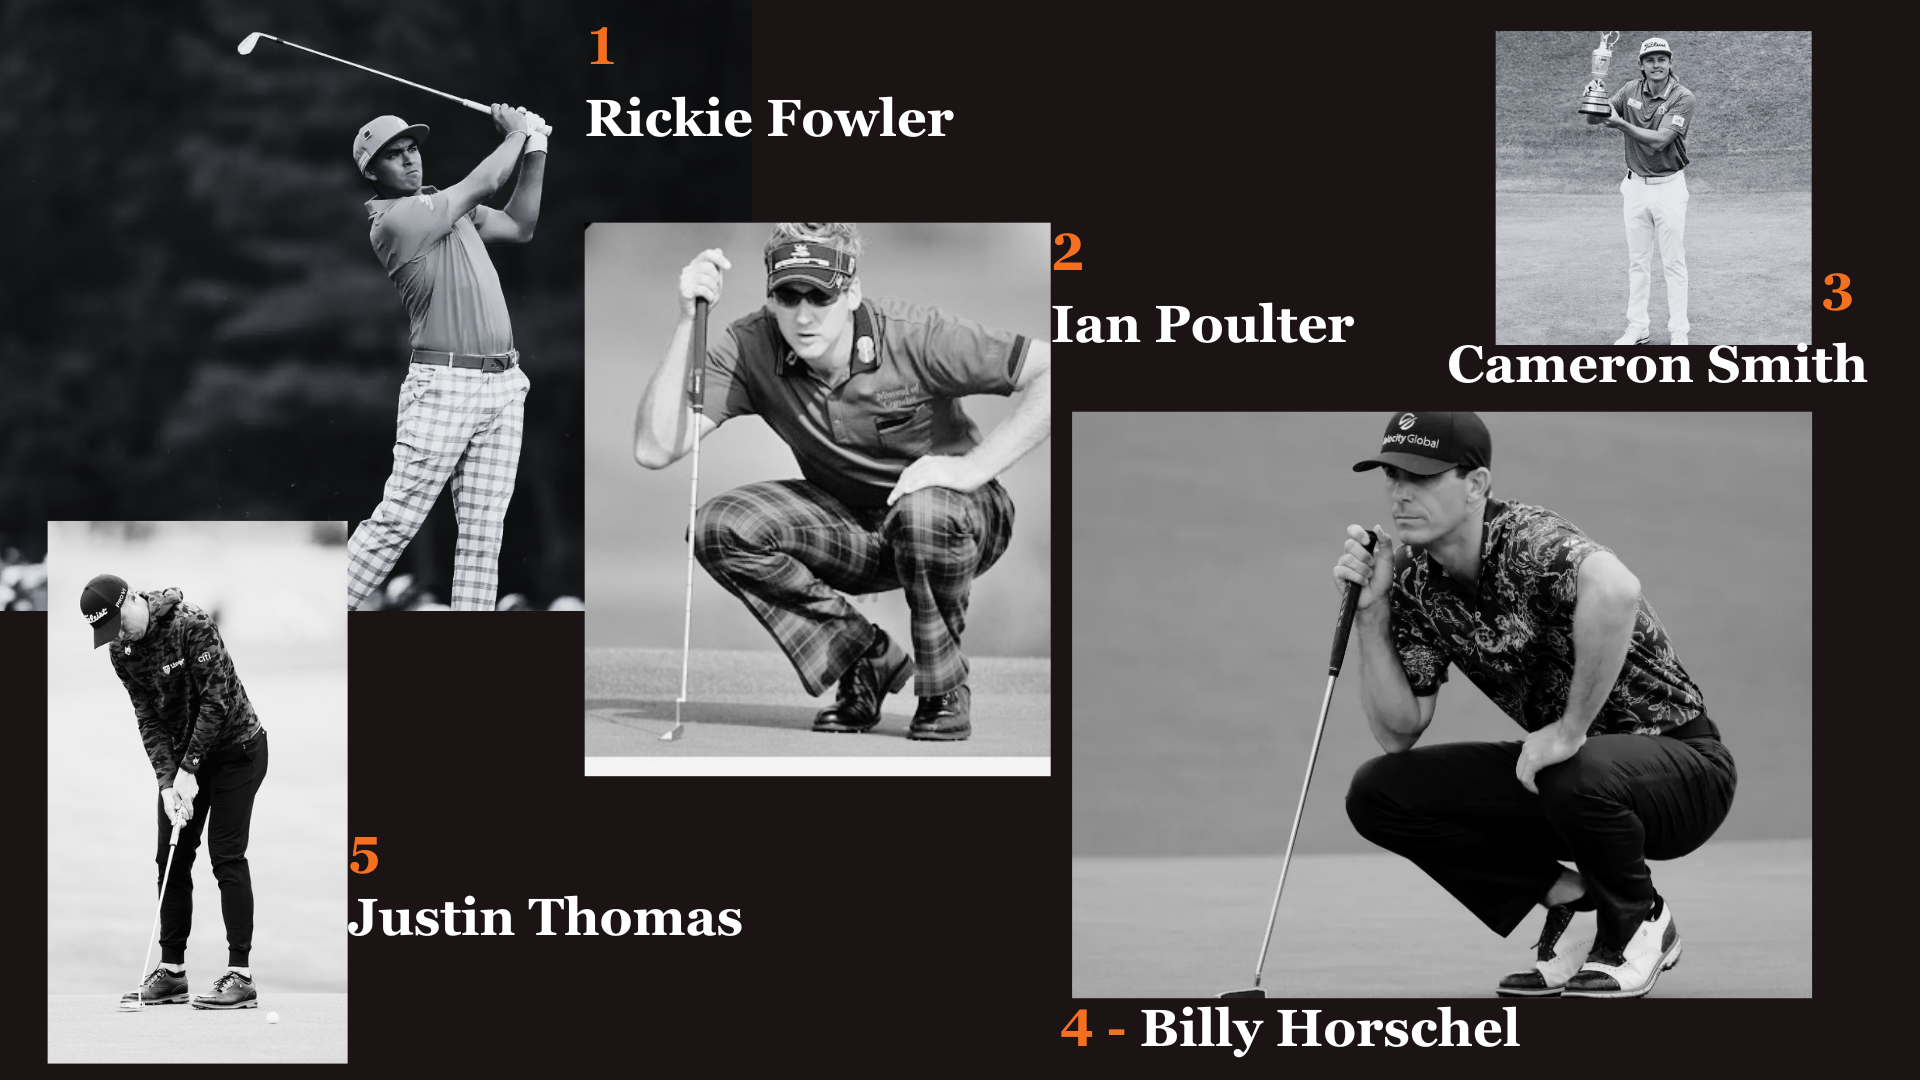 5 of PGAs most fashionable icons, Rickie Fowler, Ian Poulter, Justin Thomas, Billy Horschel, and Cameron Smith who are leading the modern fashion scene on the tour.